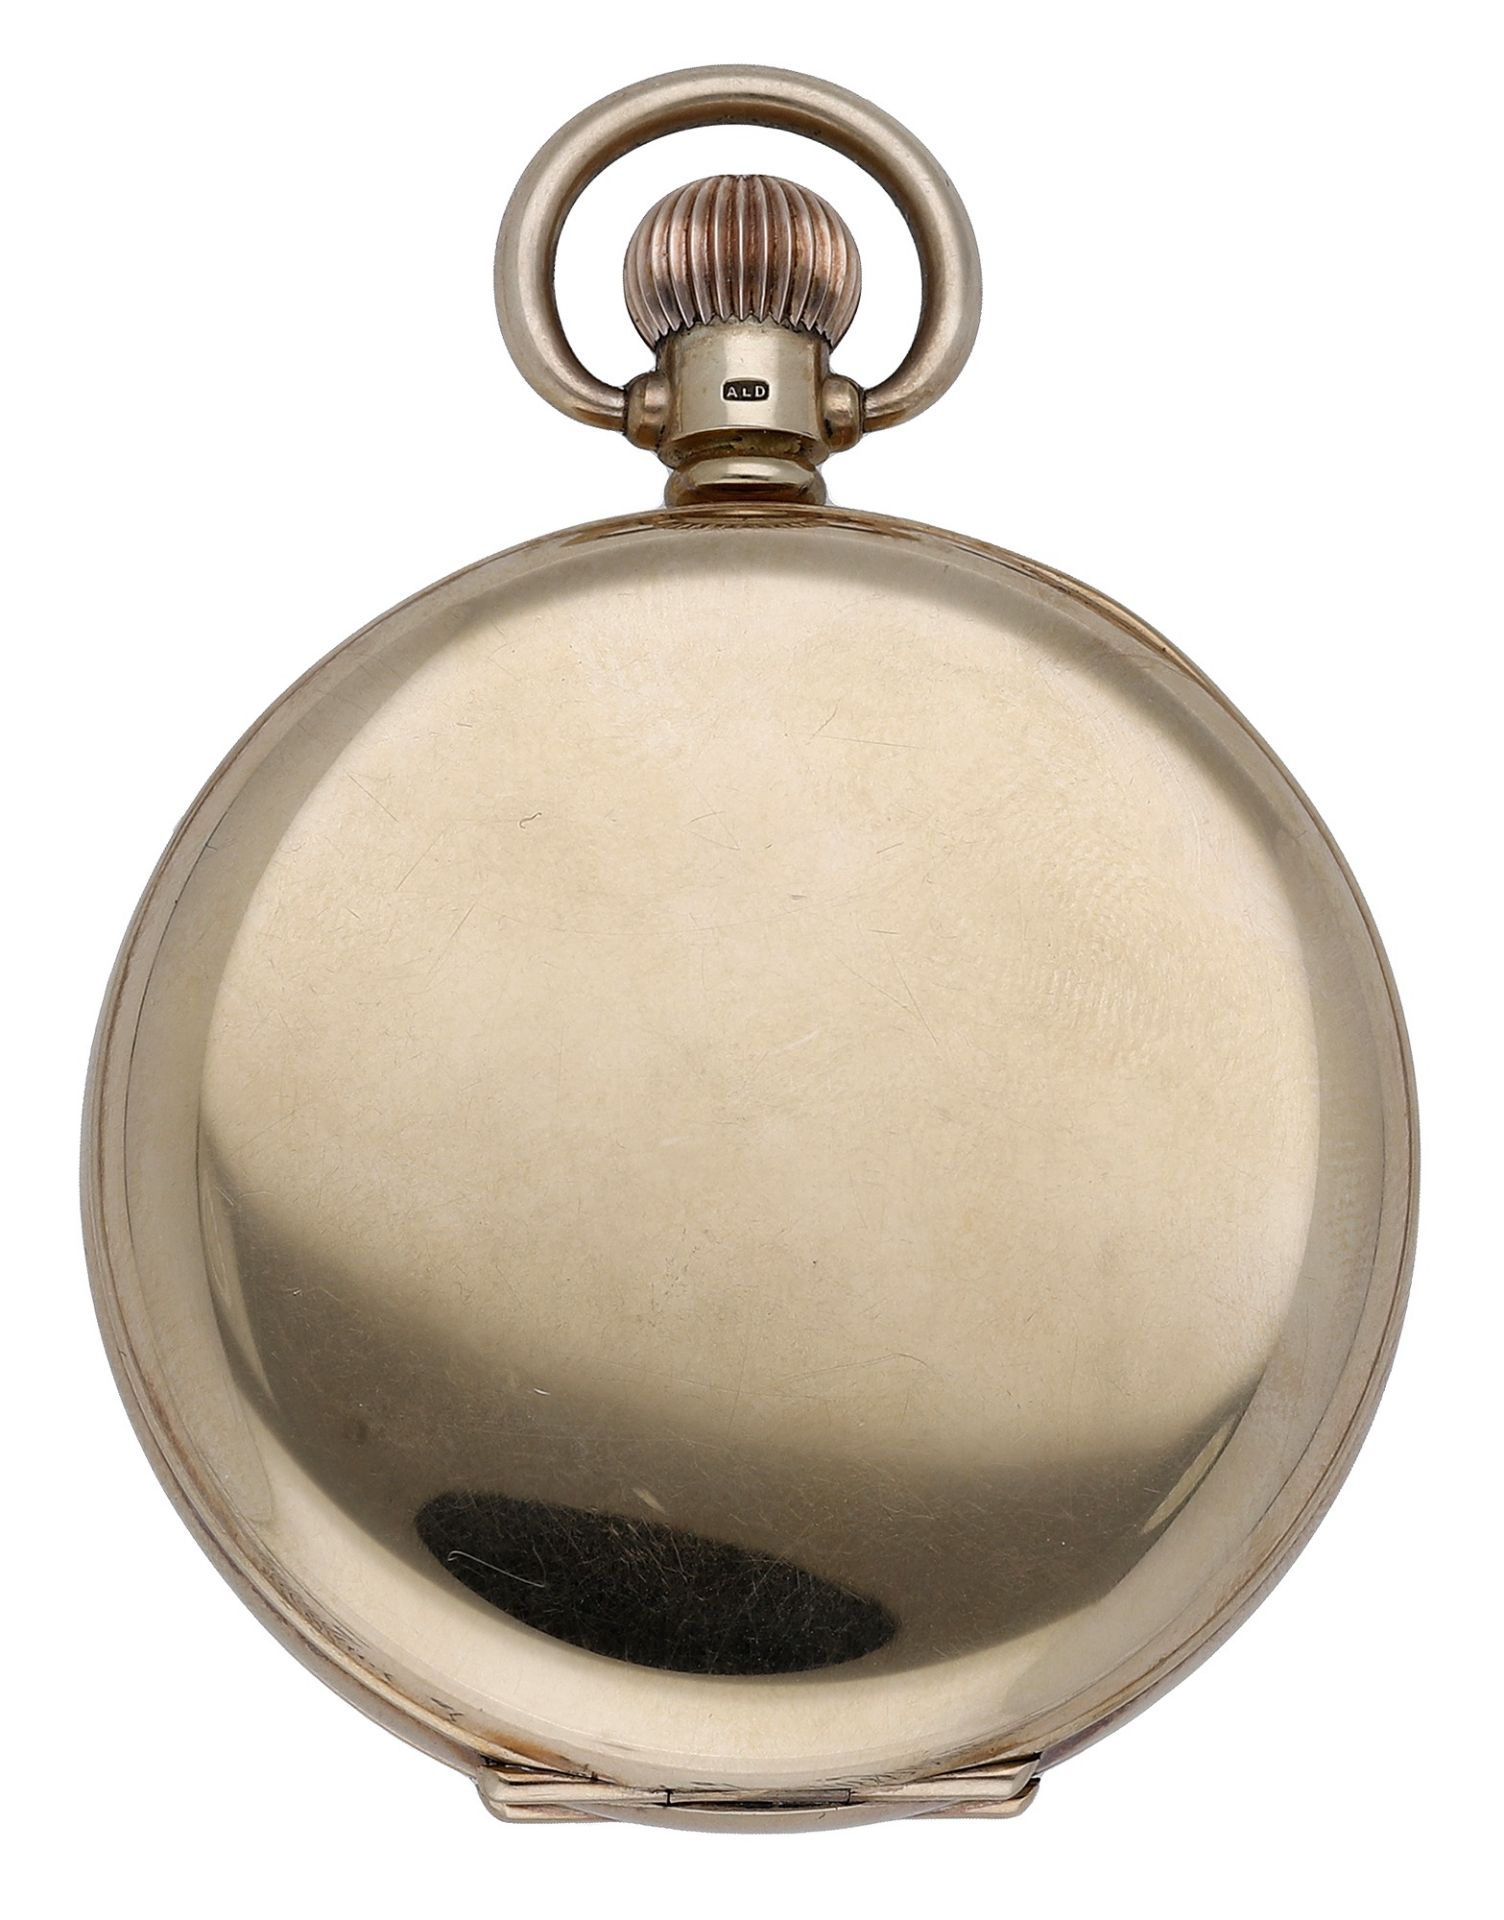 Waltham. A gold hunting cased keyless watch, 1932. Movement: lever escapement, 15 jewels, n... - Image 3 of 7